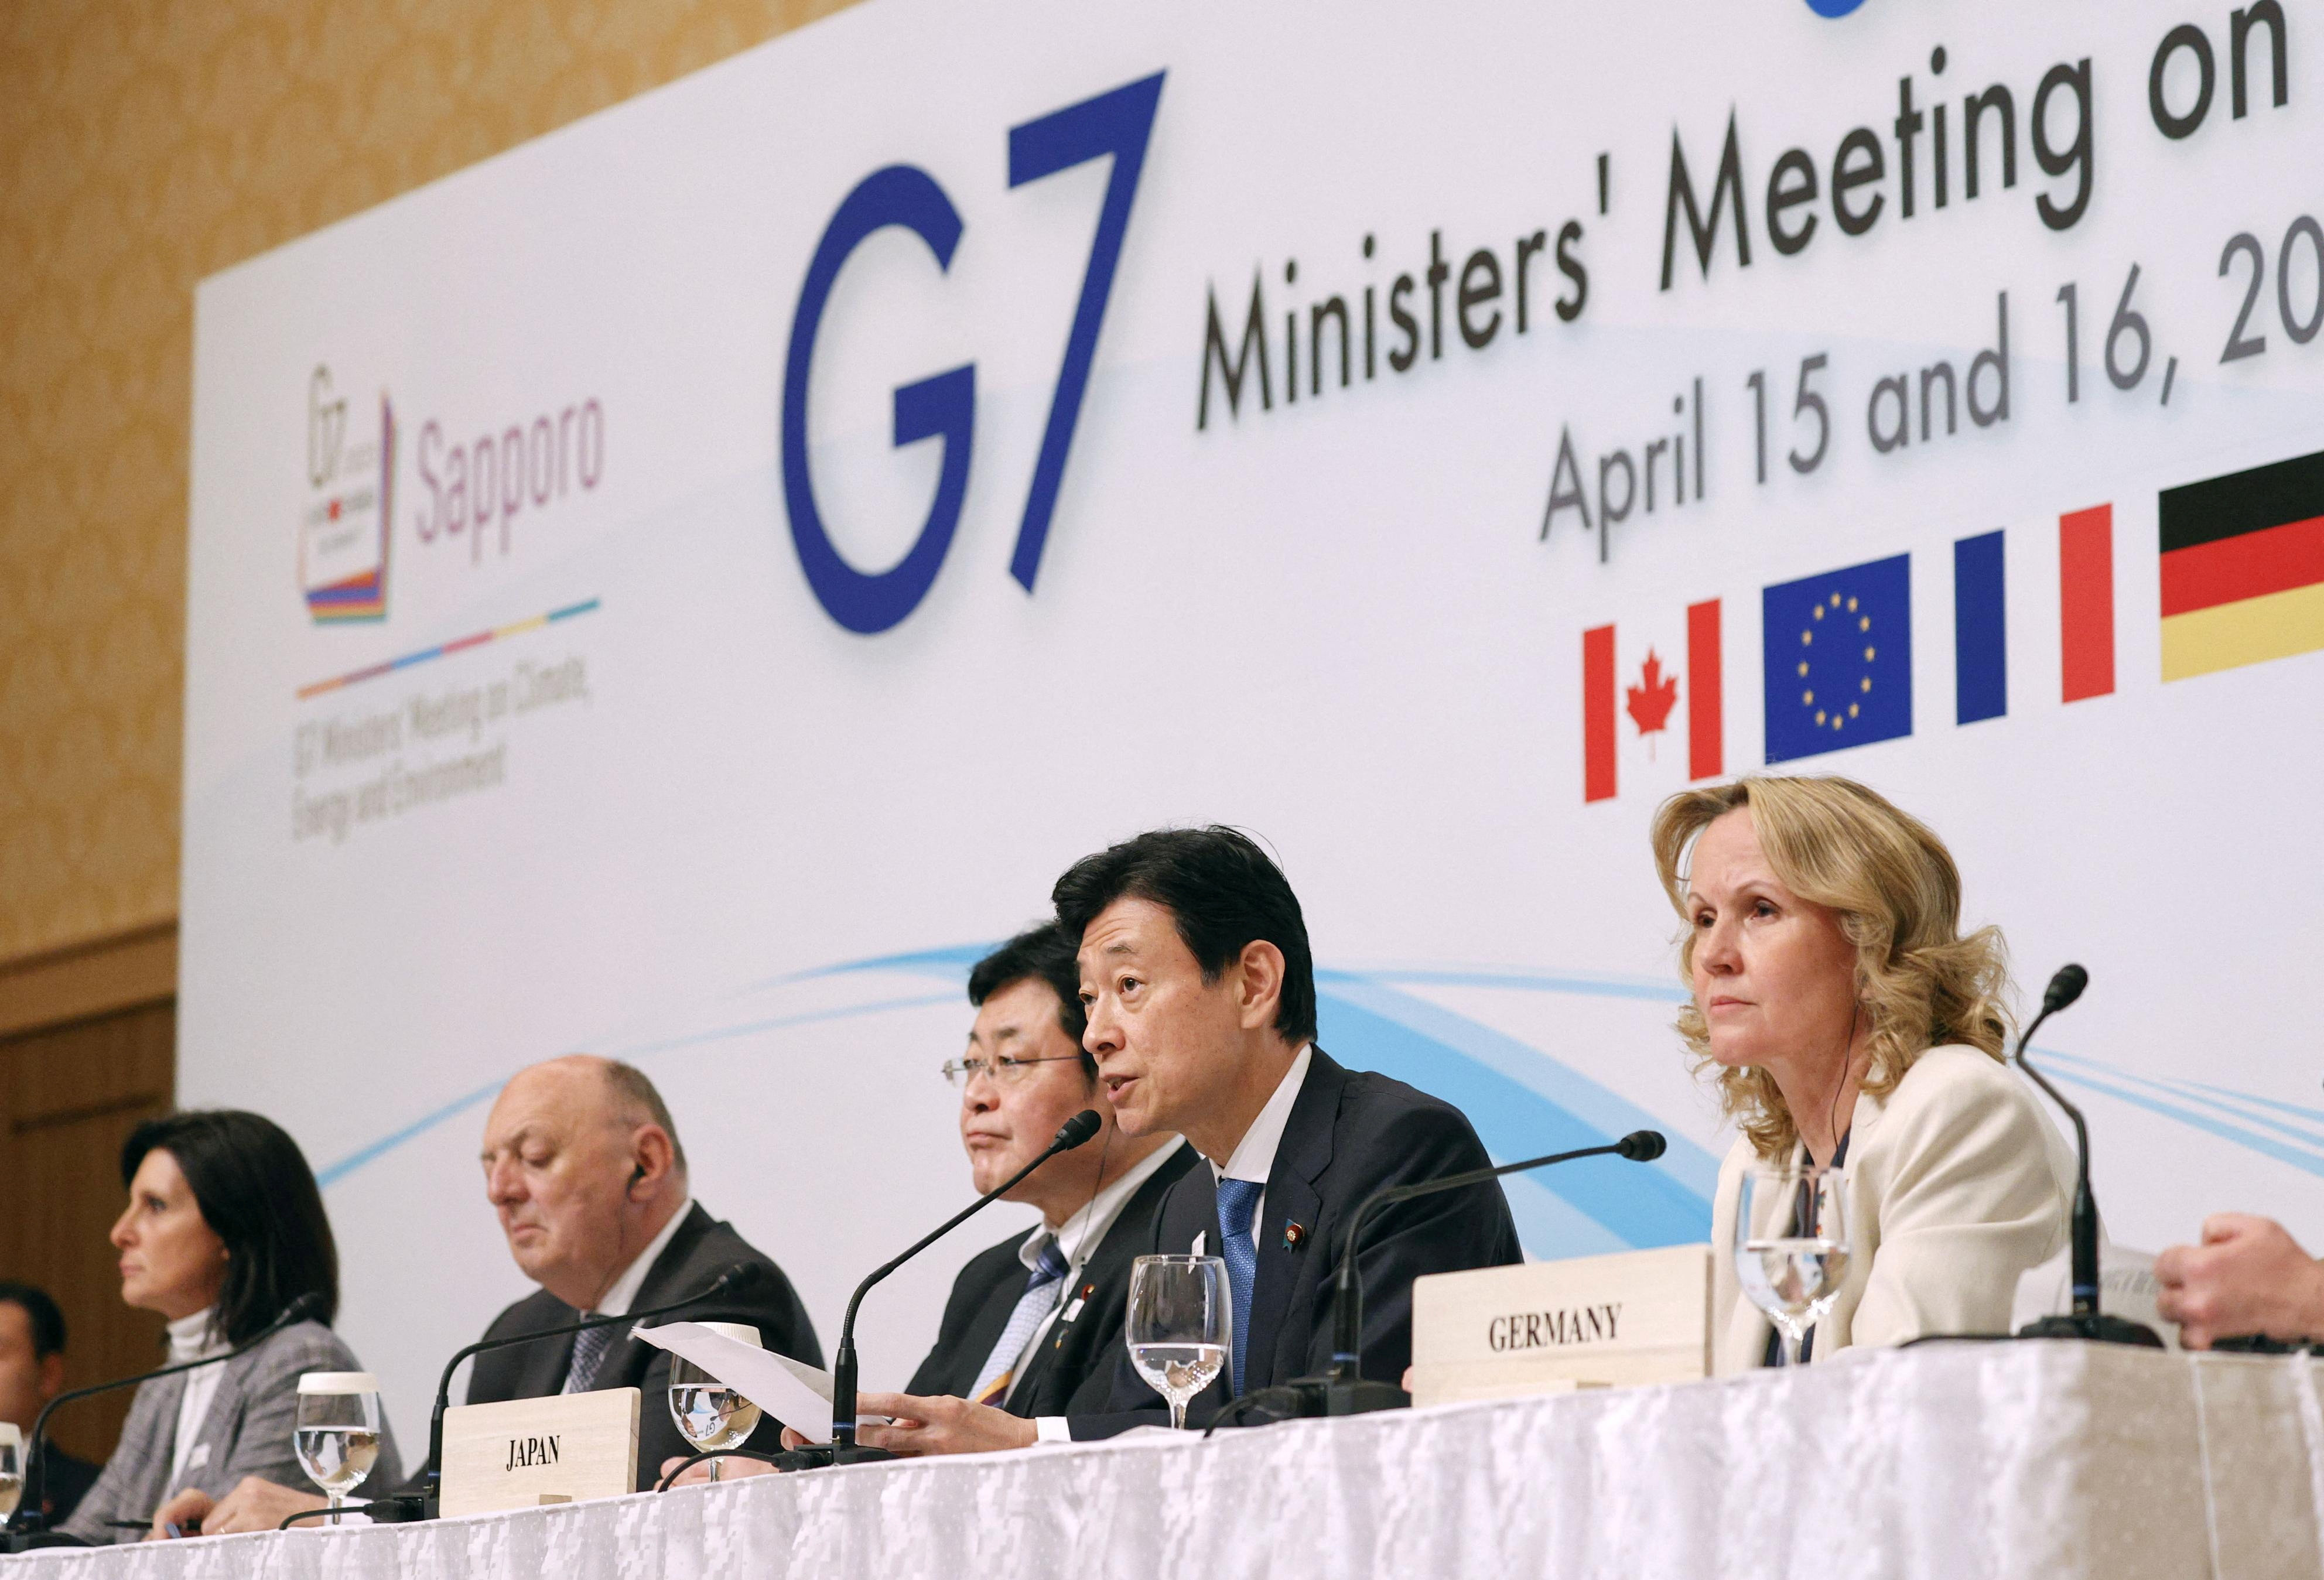 Japan’s Environment Minister Akihiro Nishimura (centre) and Minister of Economy, Trade and Industry Yasutoshi Nishimura (second right) attend a news conference of the Group of 7 Ministers’ Meeting on Climate, Energy and Environment, in Sapporo, Japan, on April 16. Photo: Kyodo